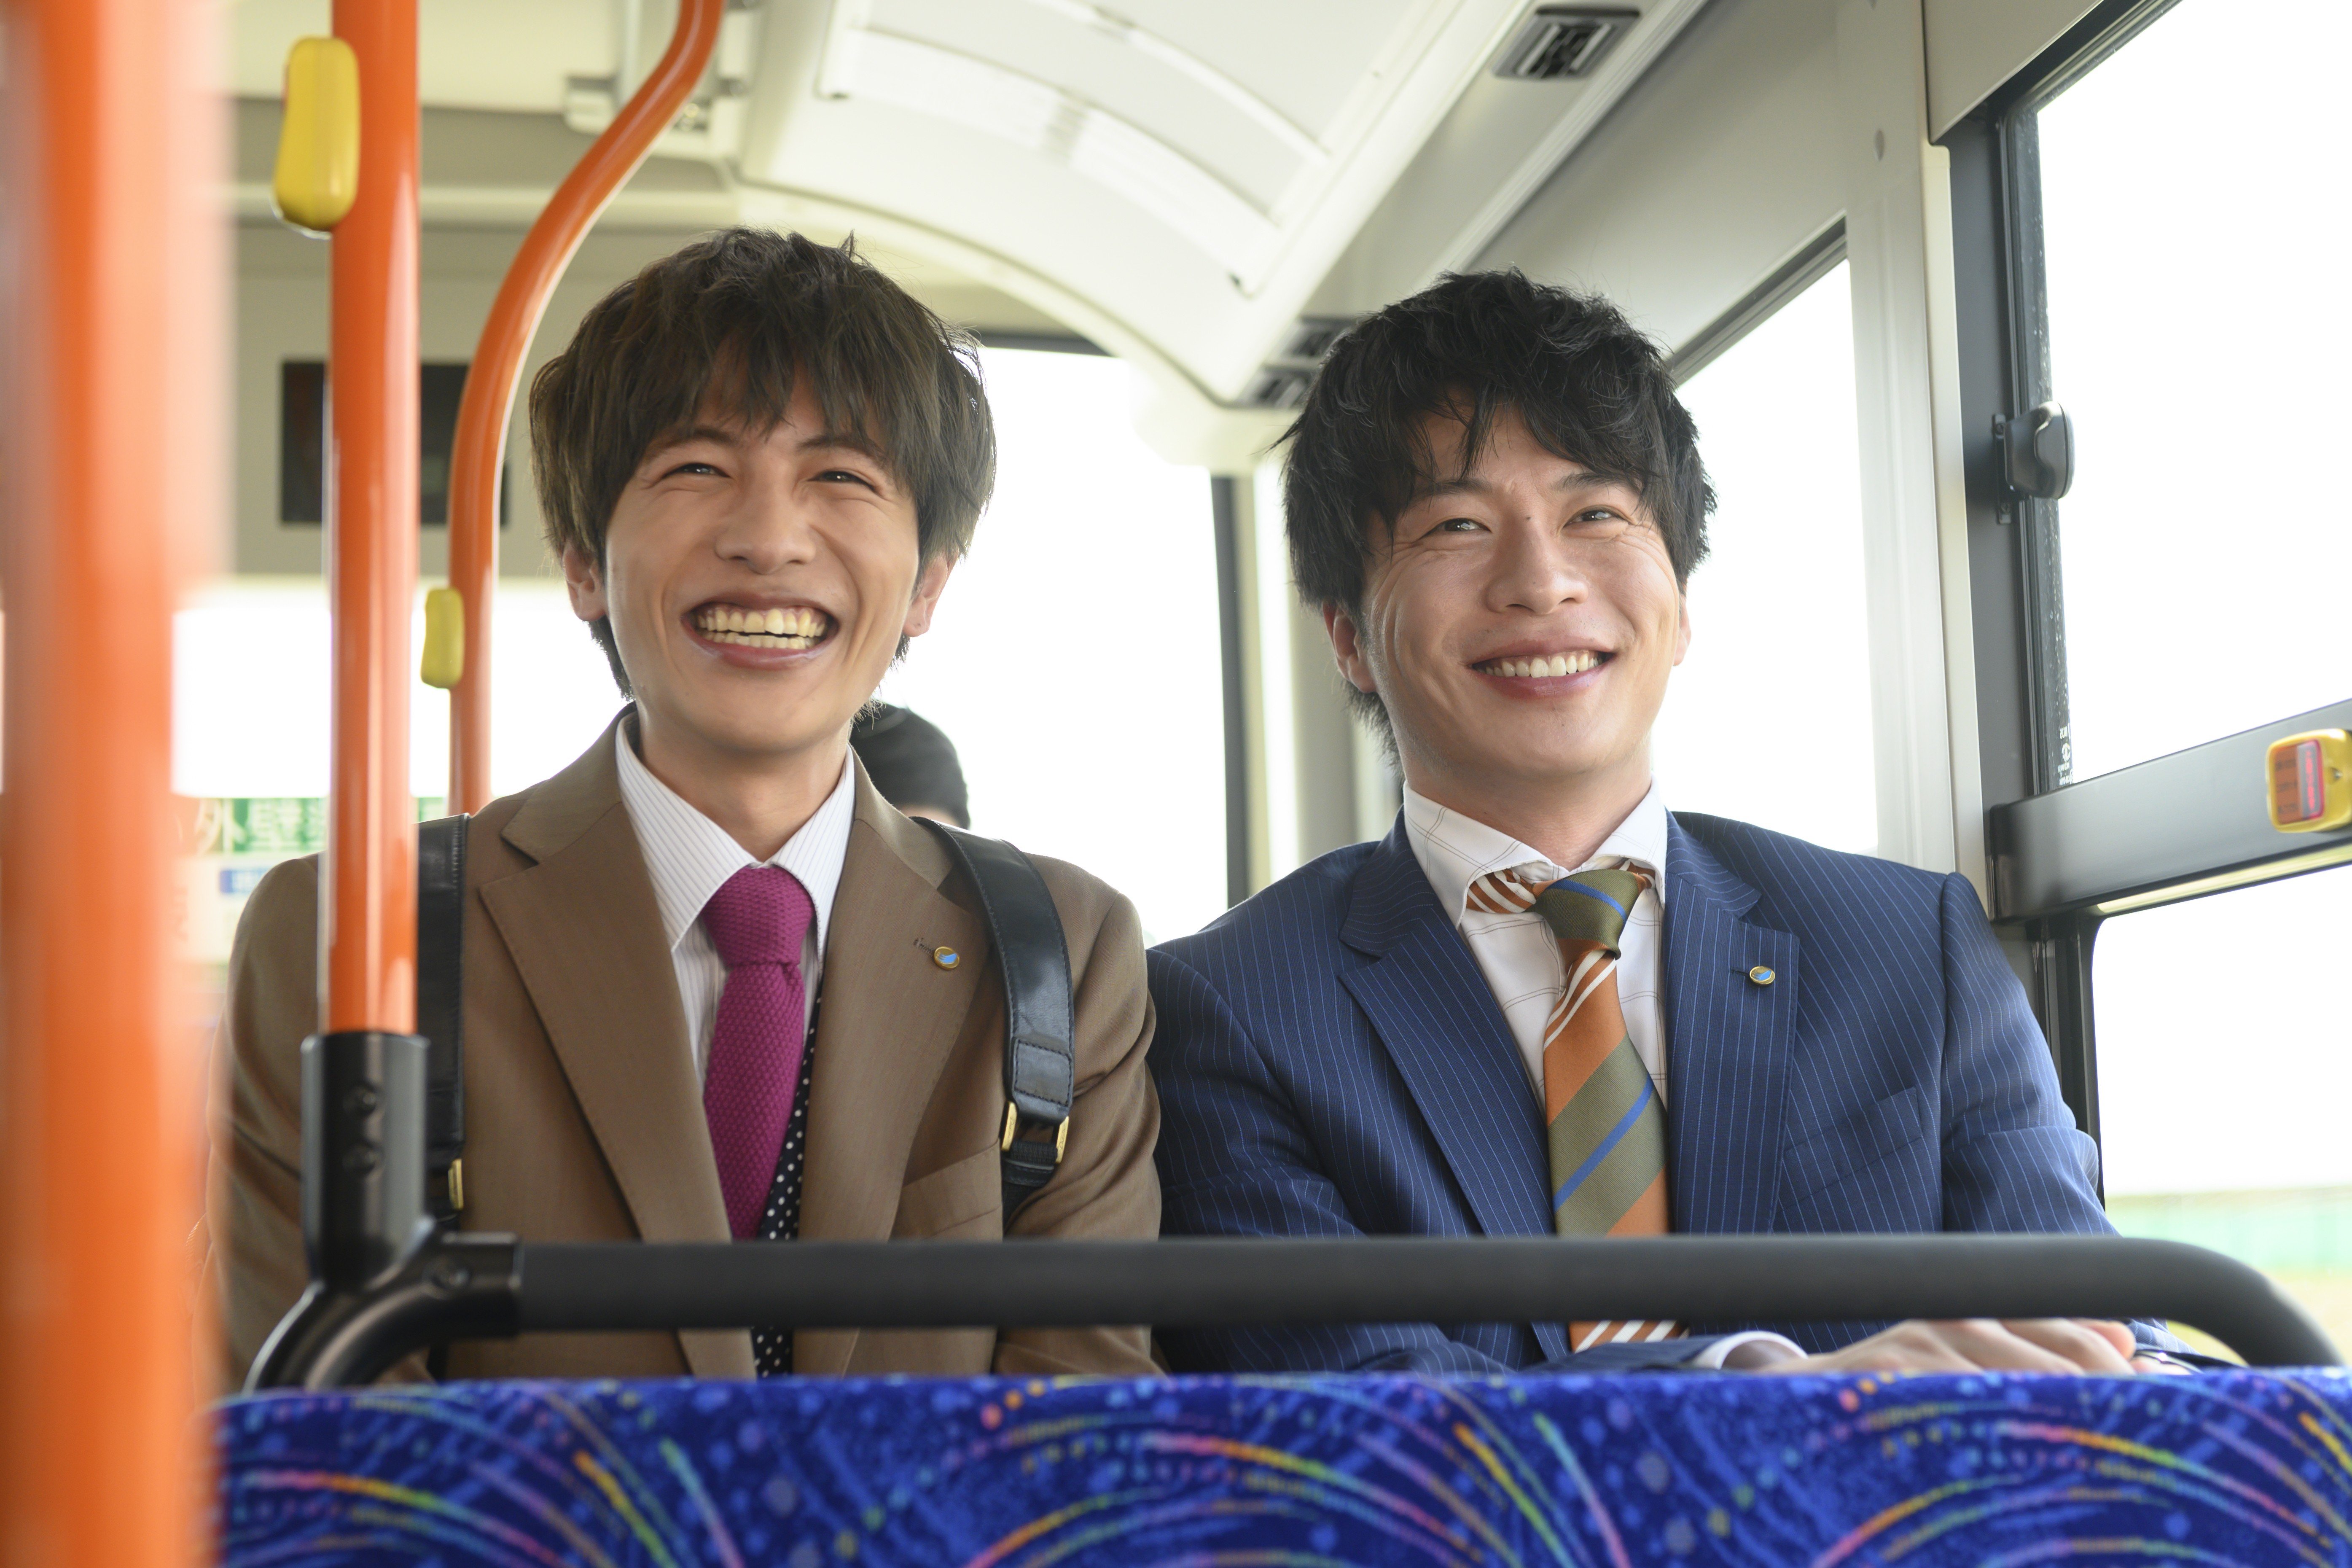 Ossan S Love Love Or Dead Film Review Japanese Gay Office Comedy Piggybacks On Success Of Tv Series South China Morning Post